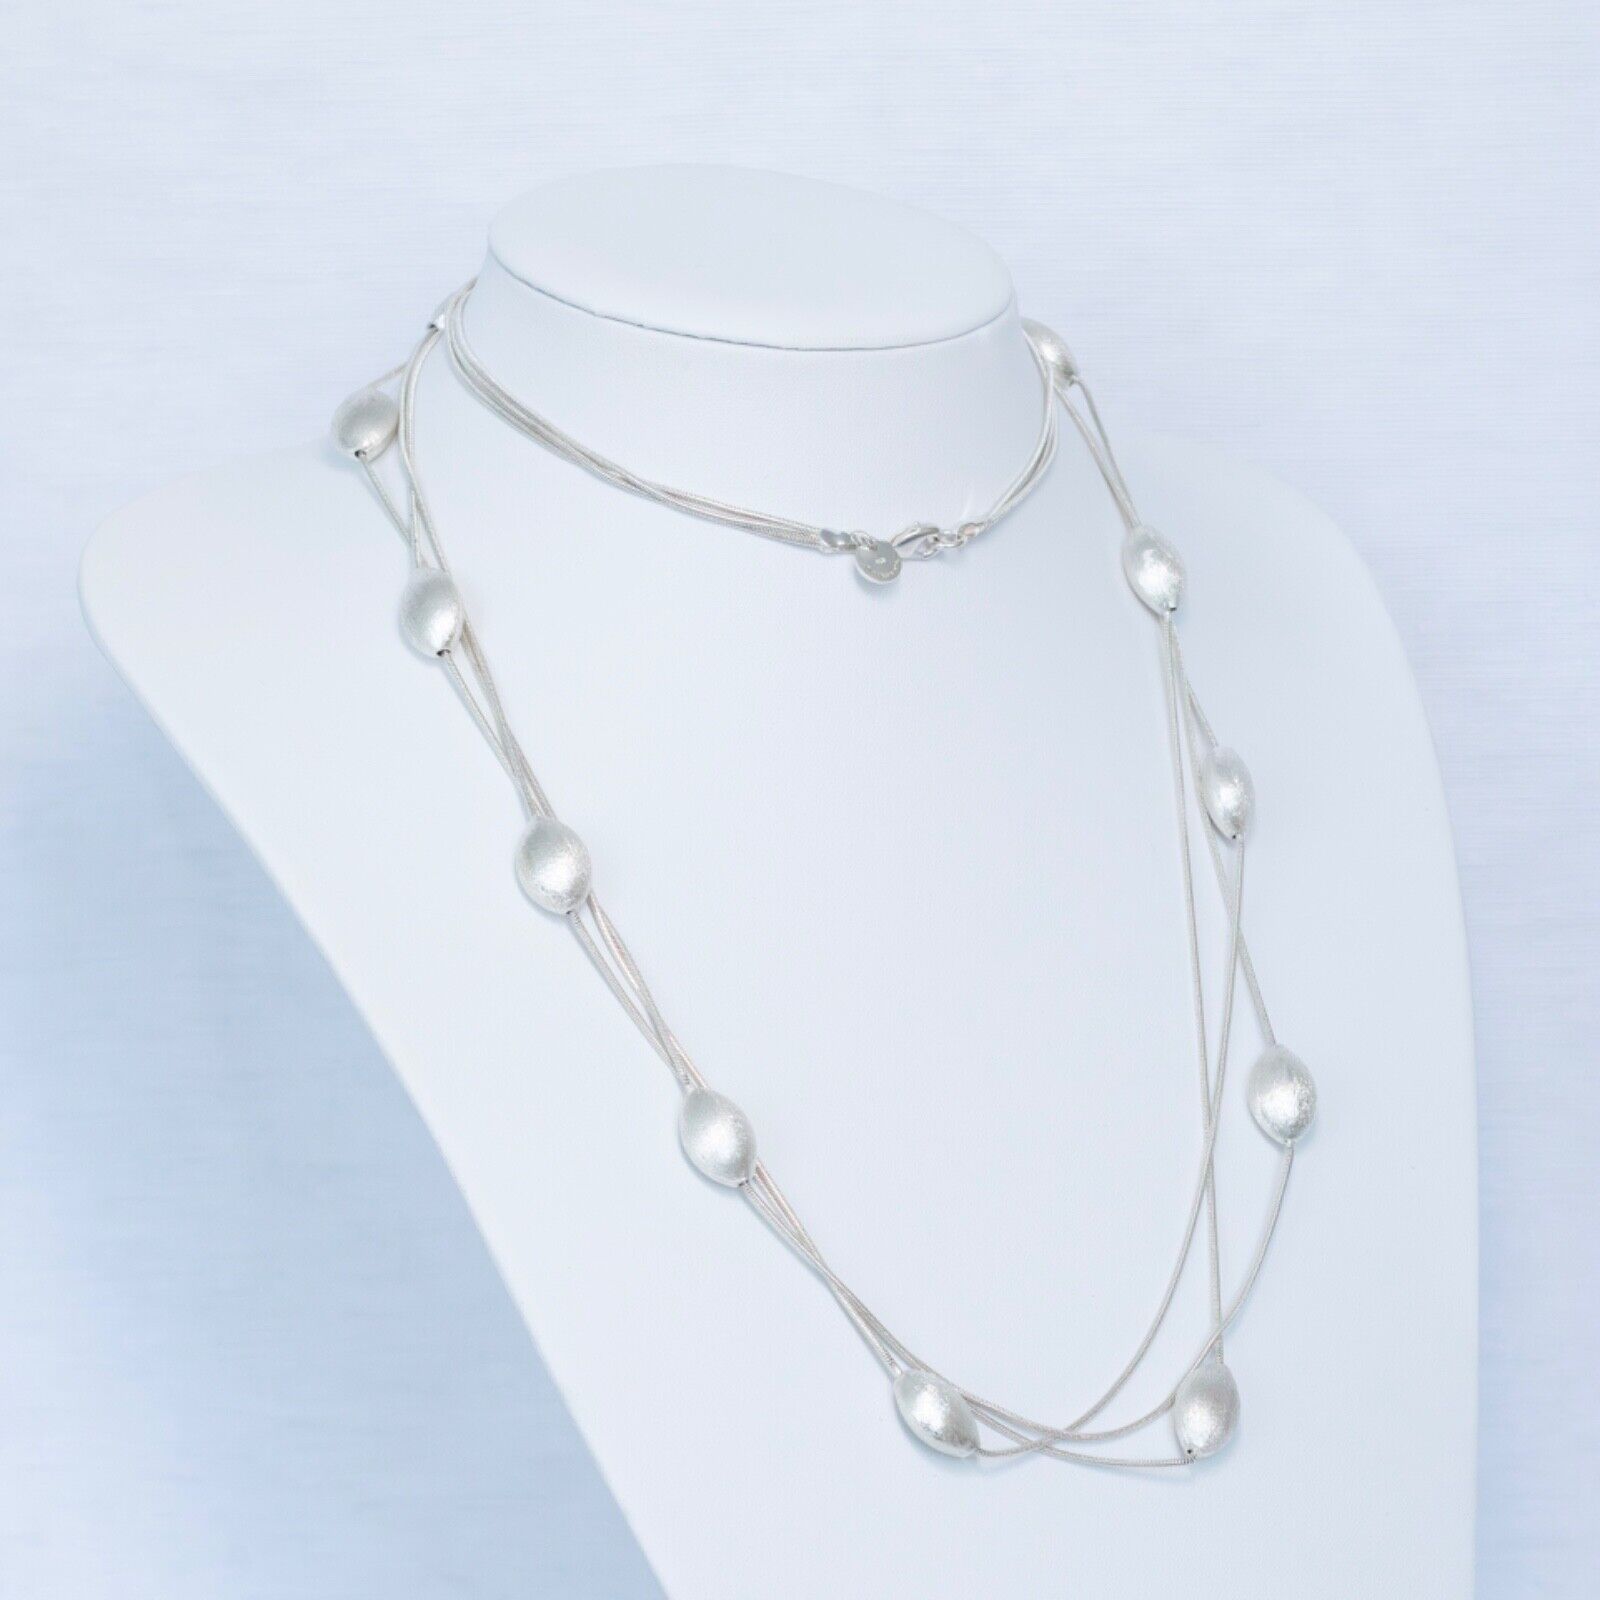 Tiffany & Co. Collier 925 Silver Solid Sterling Choker Chain 89cm 2000 Vintage